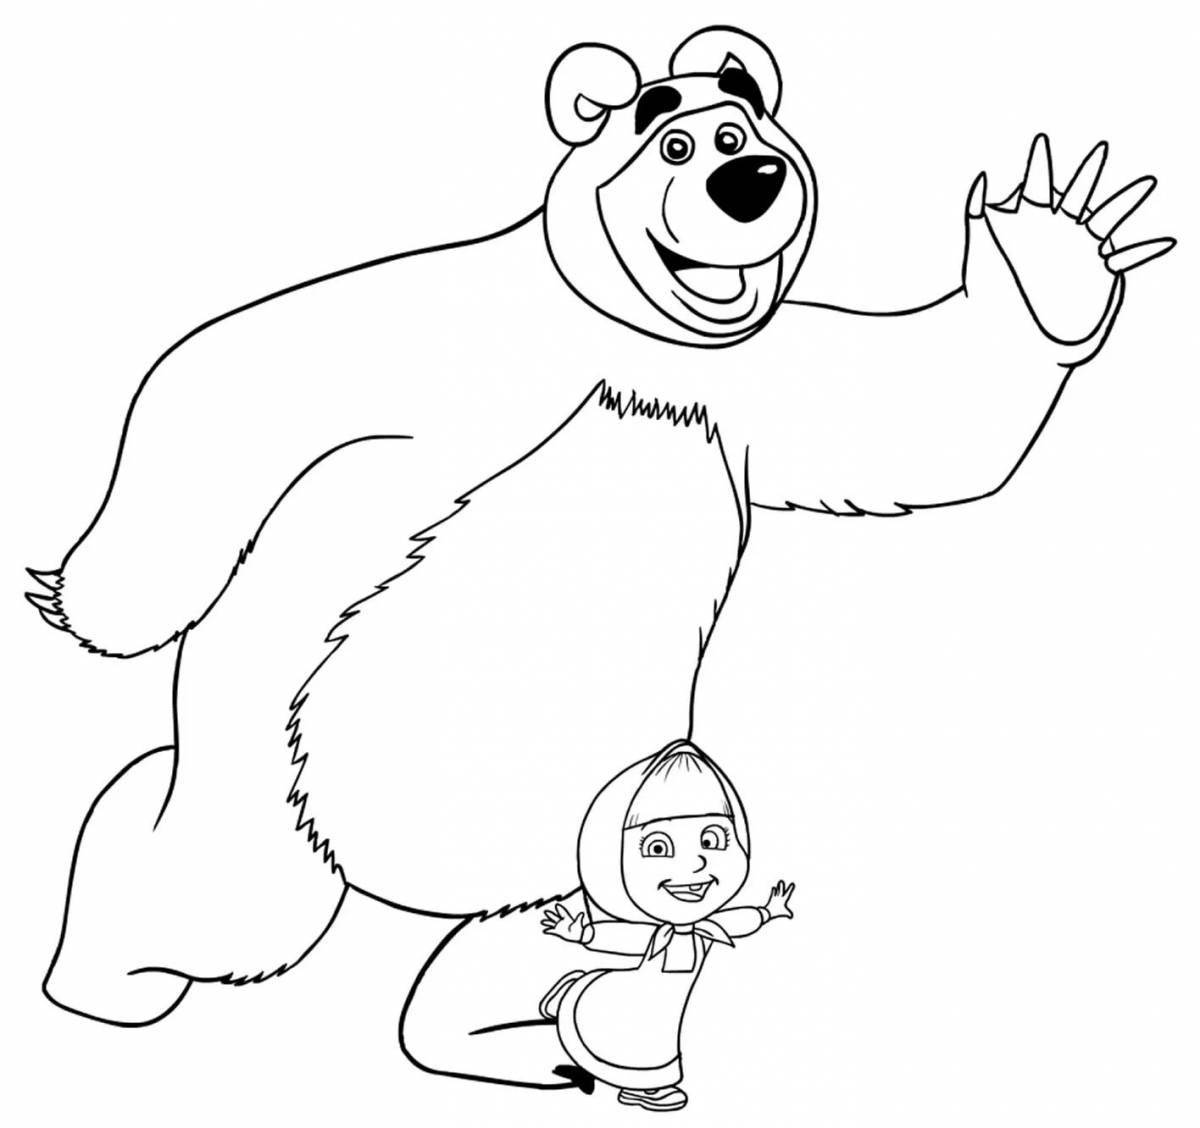 Coloring radiant Masha and the bear